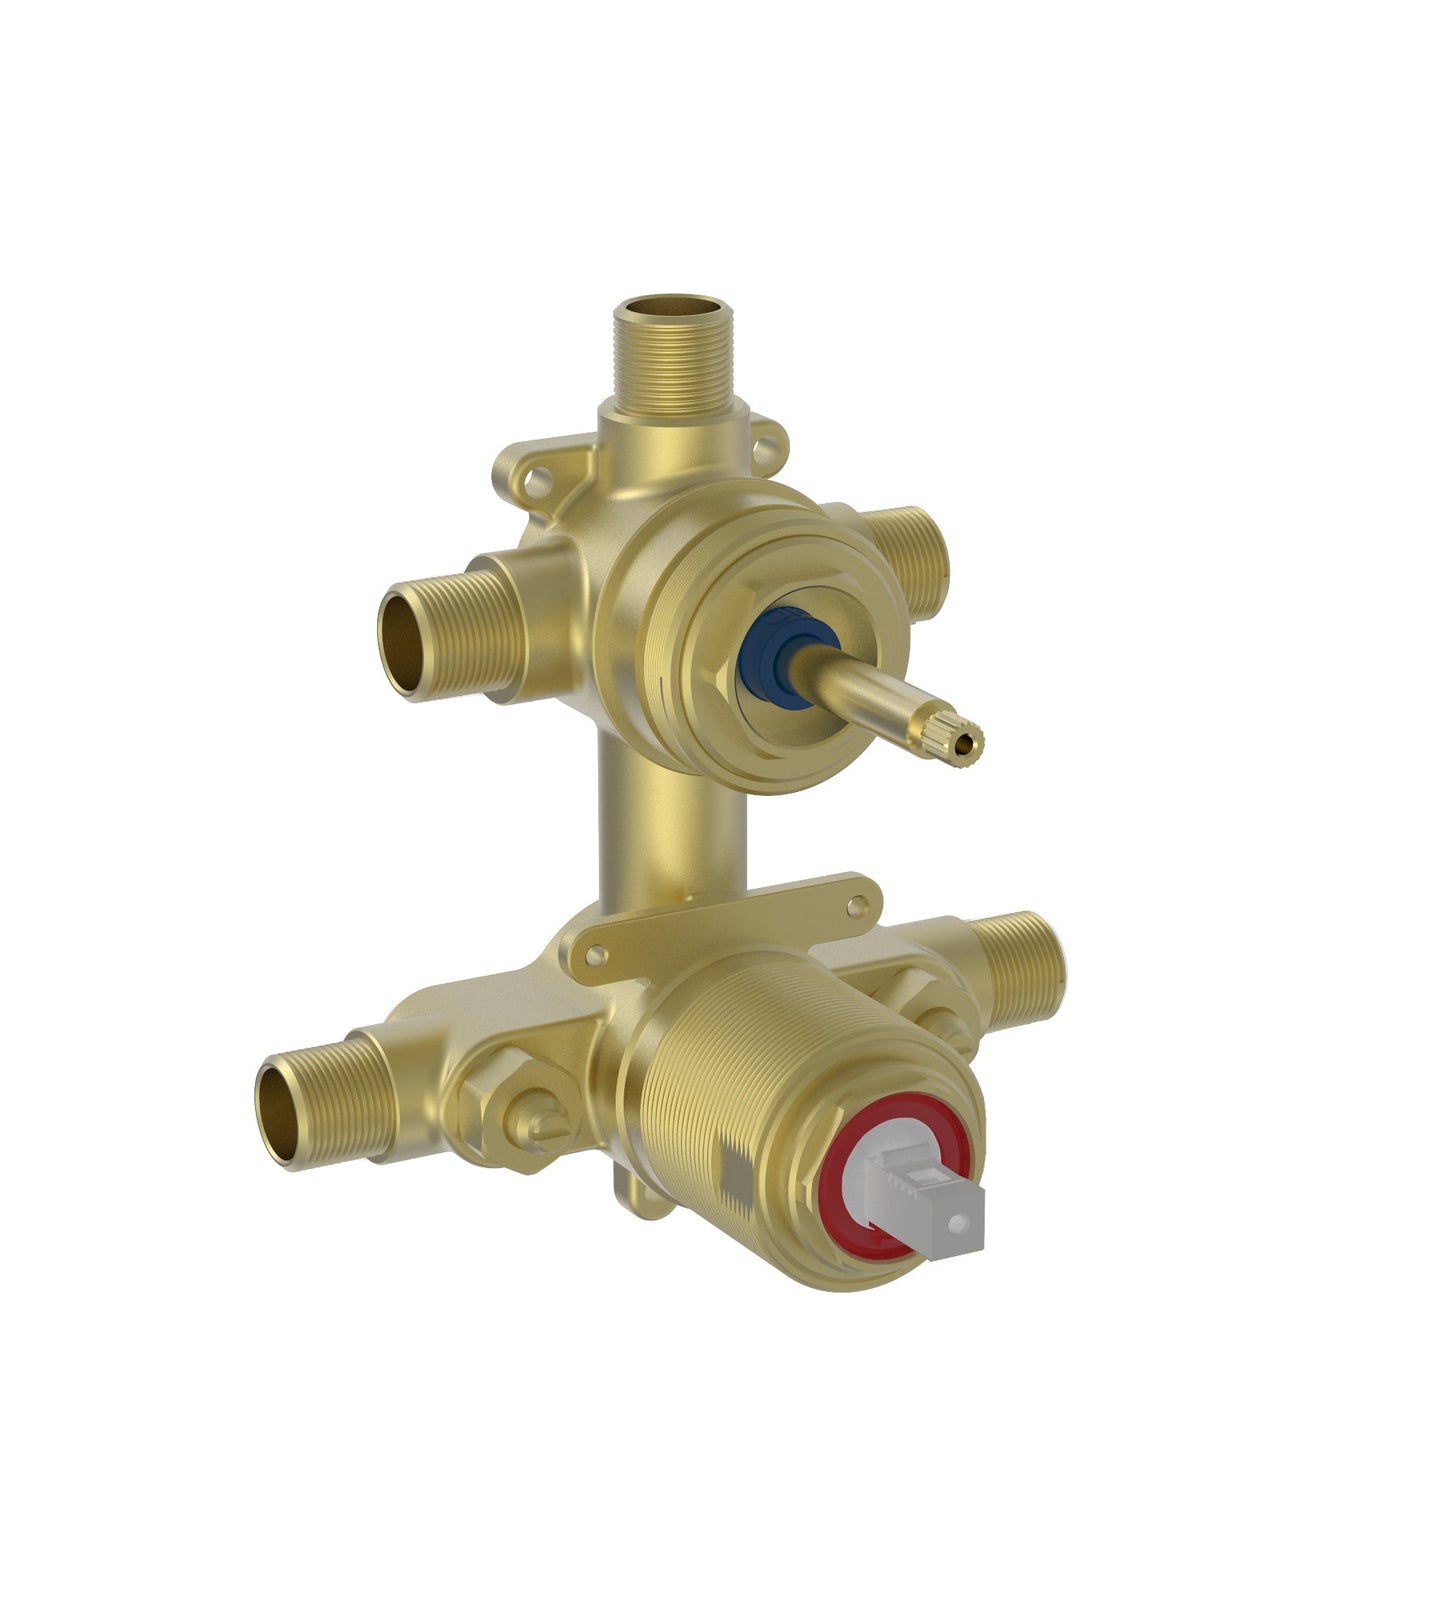 Baril 3-Way Pressure Balanced Rough-In Valve with Shared Port (VALVES 9191)